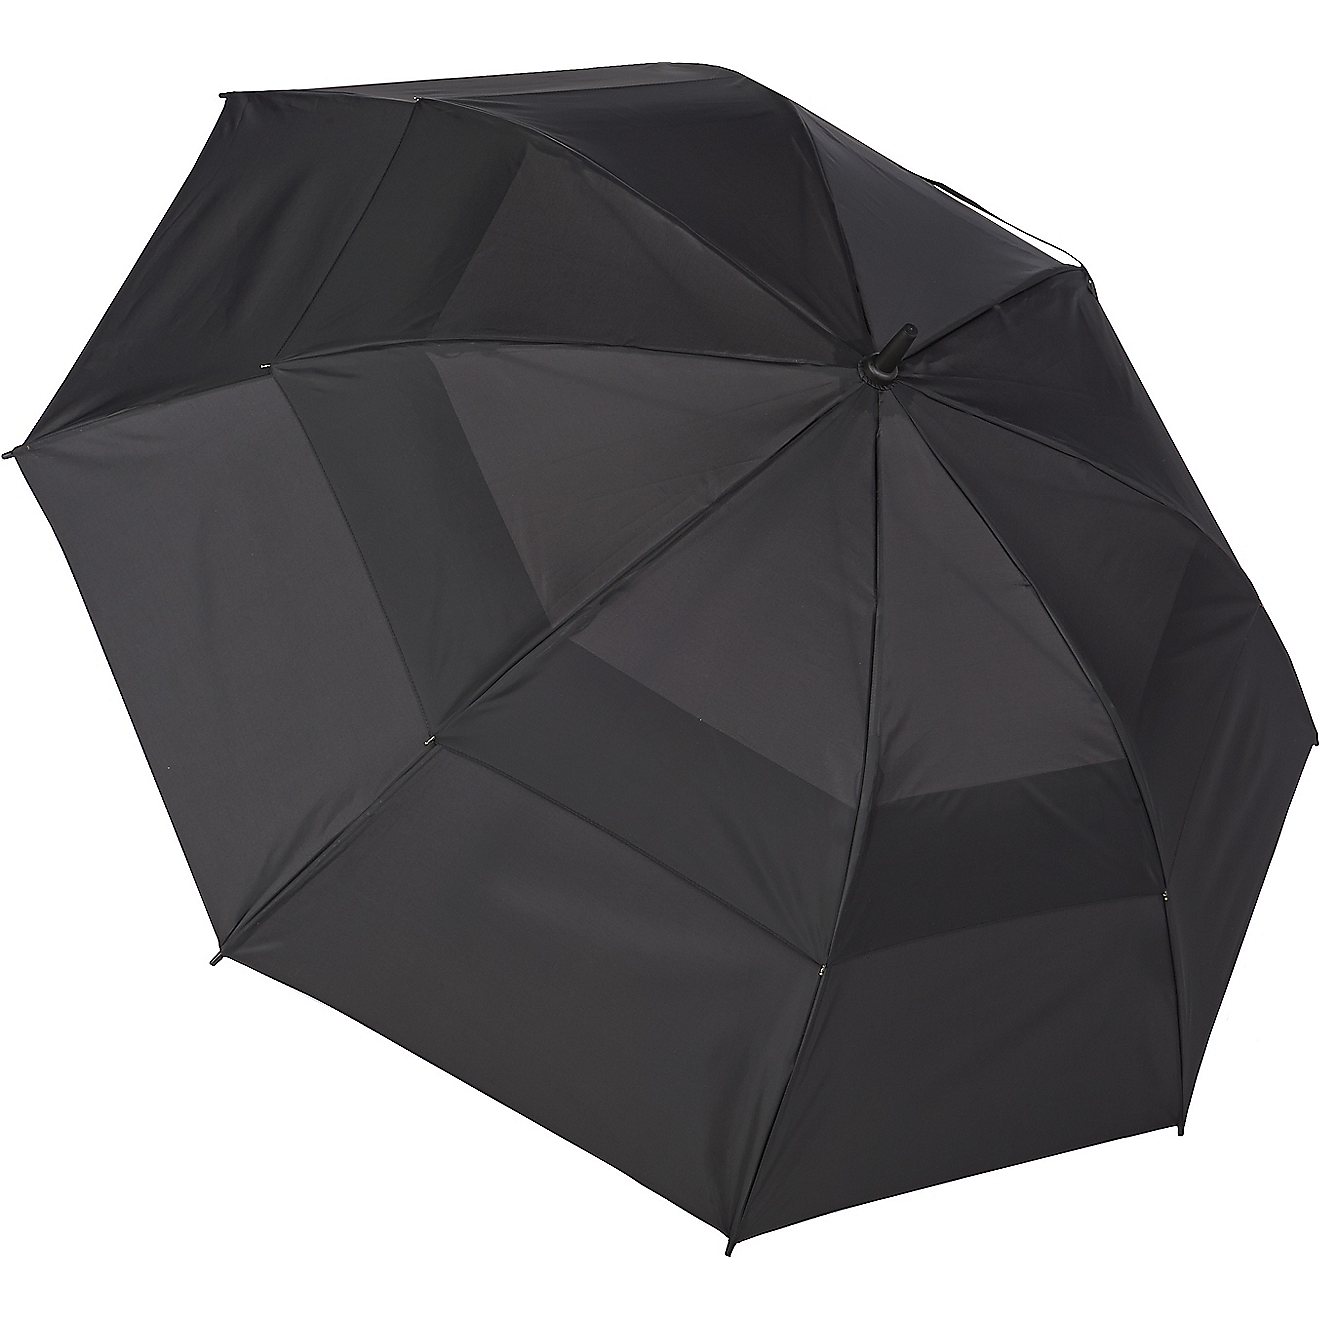 totes Adults' totesport Vented Canopy Auto Golf Umbrella                                                                         - view number 1